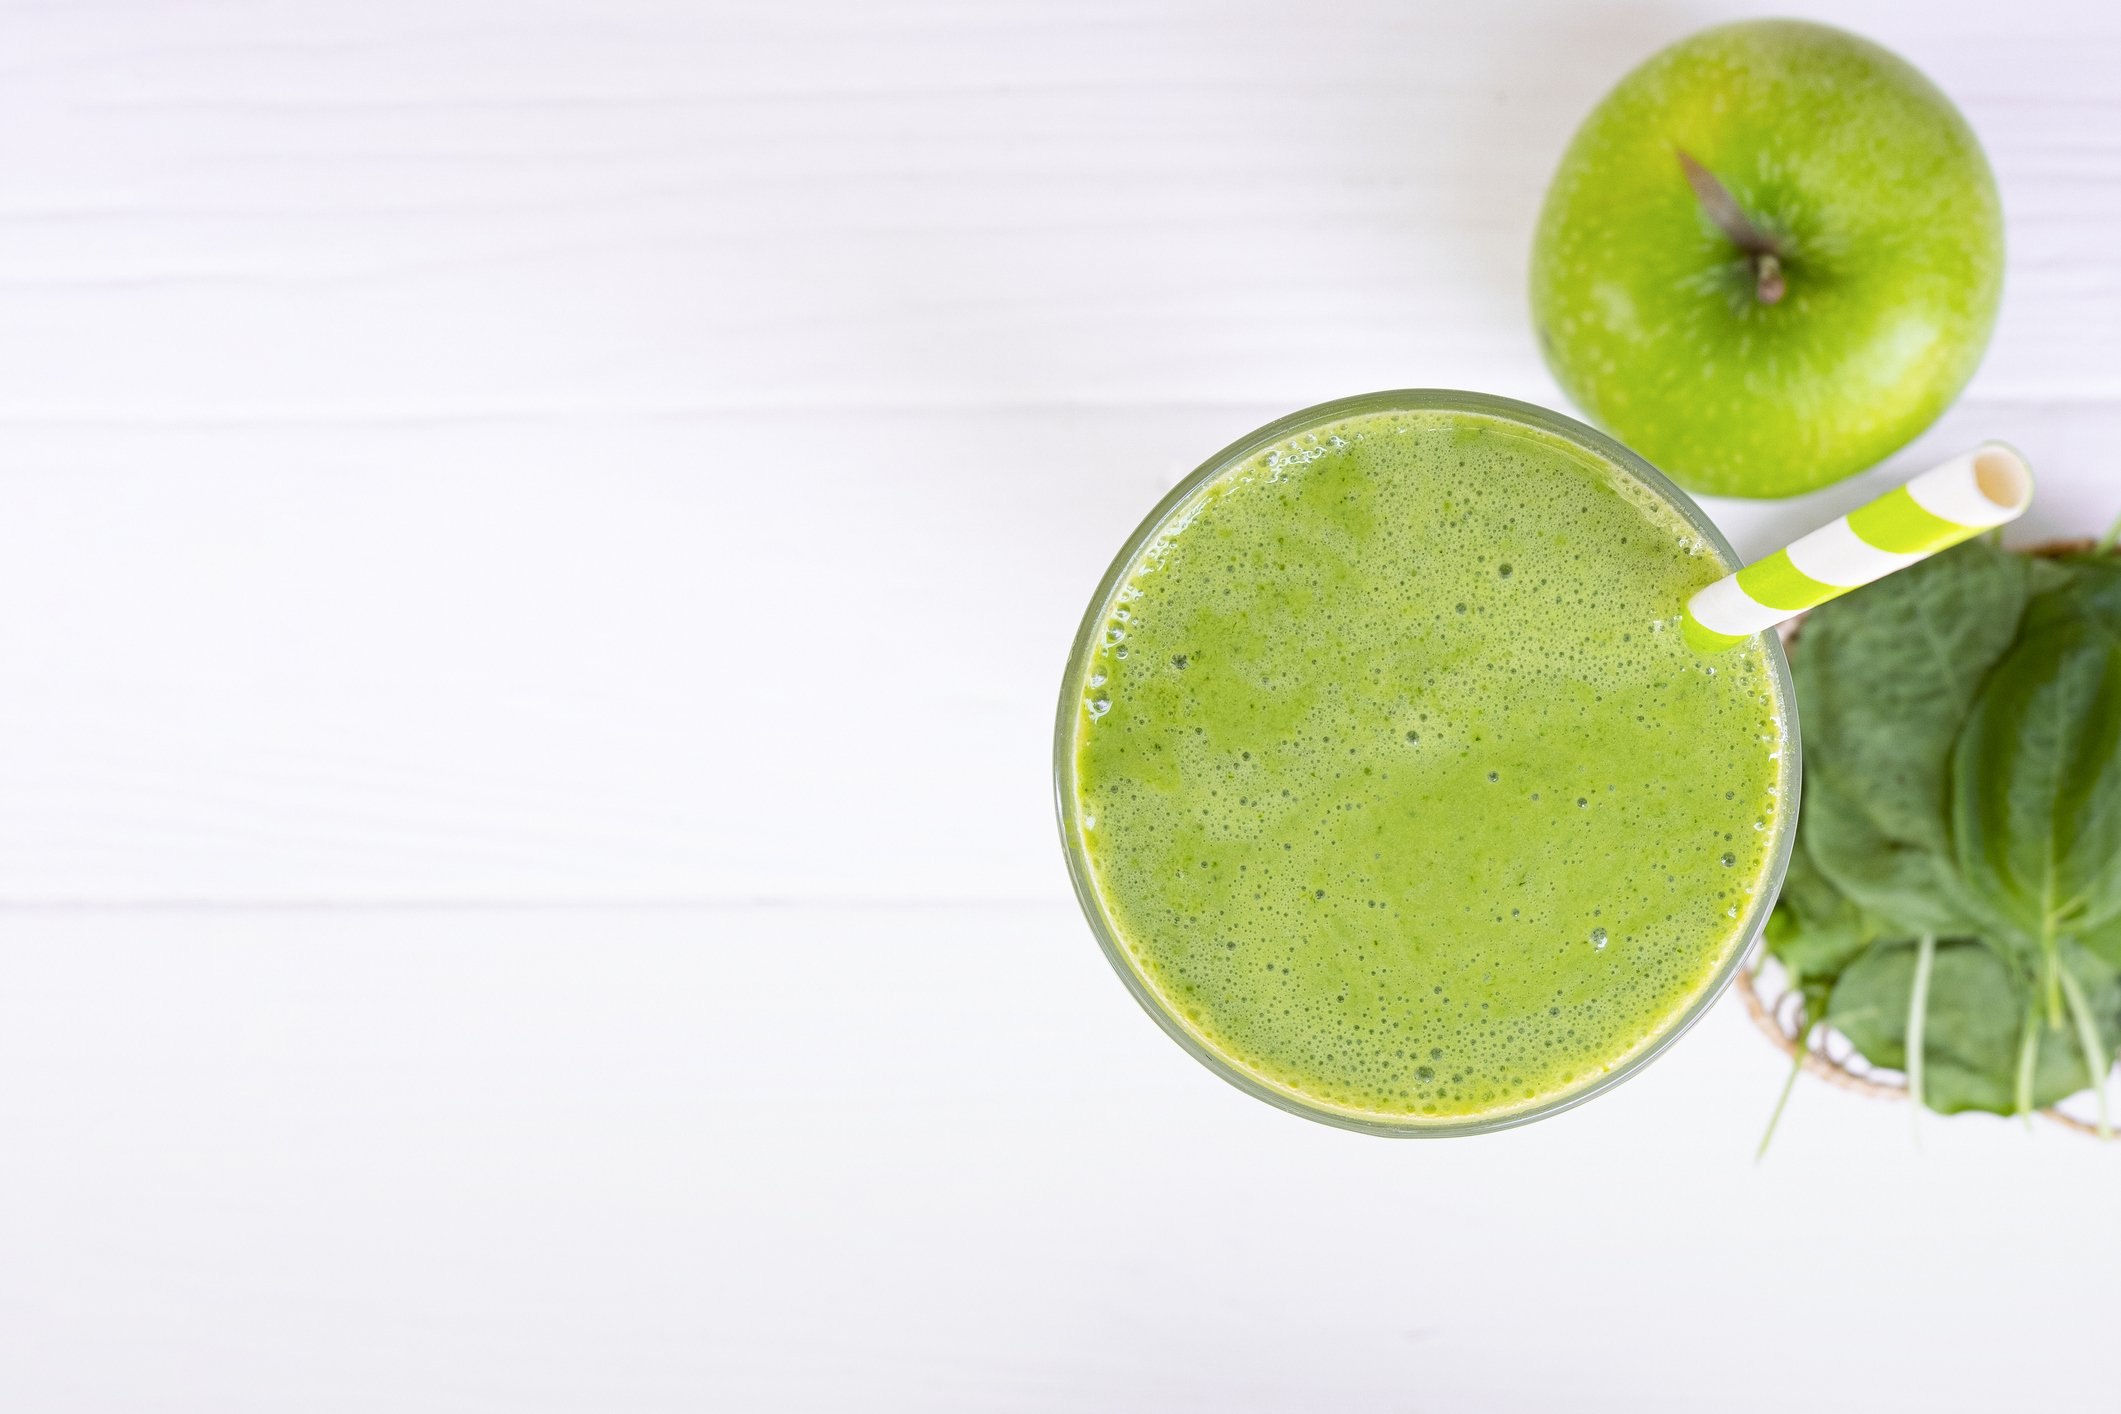 Dr. Epperly's Green Power Smoothie